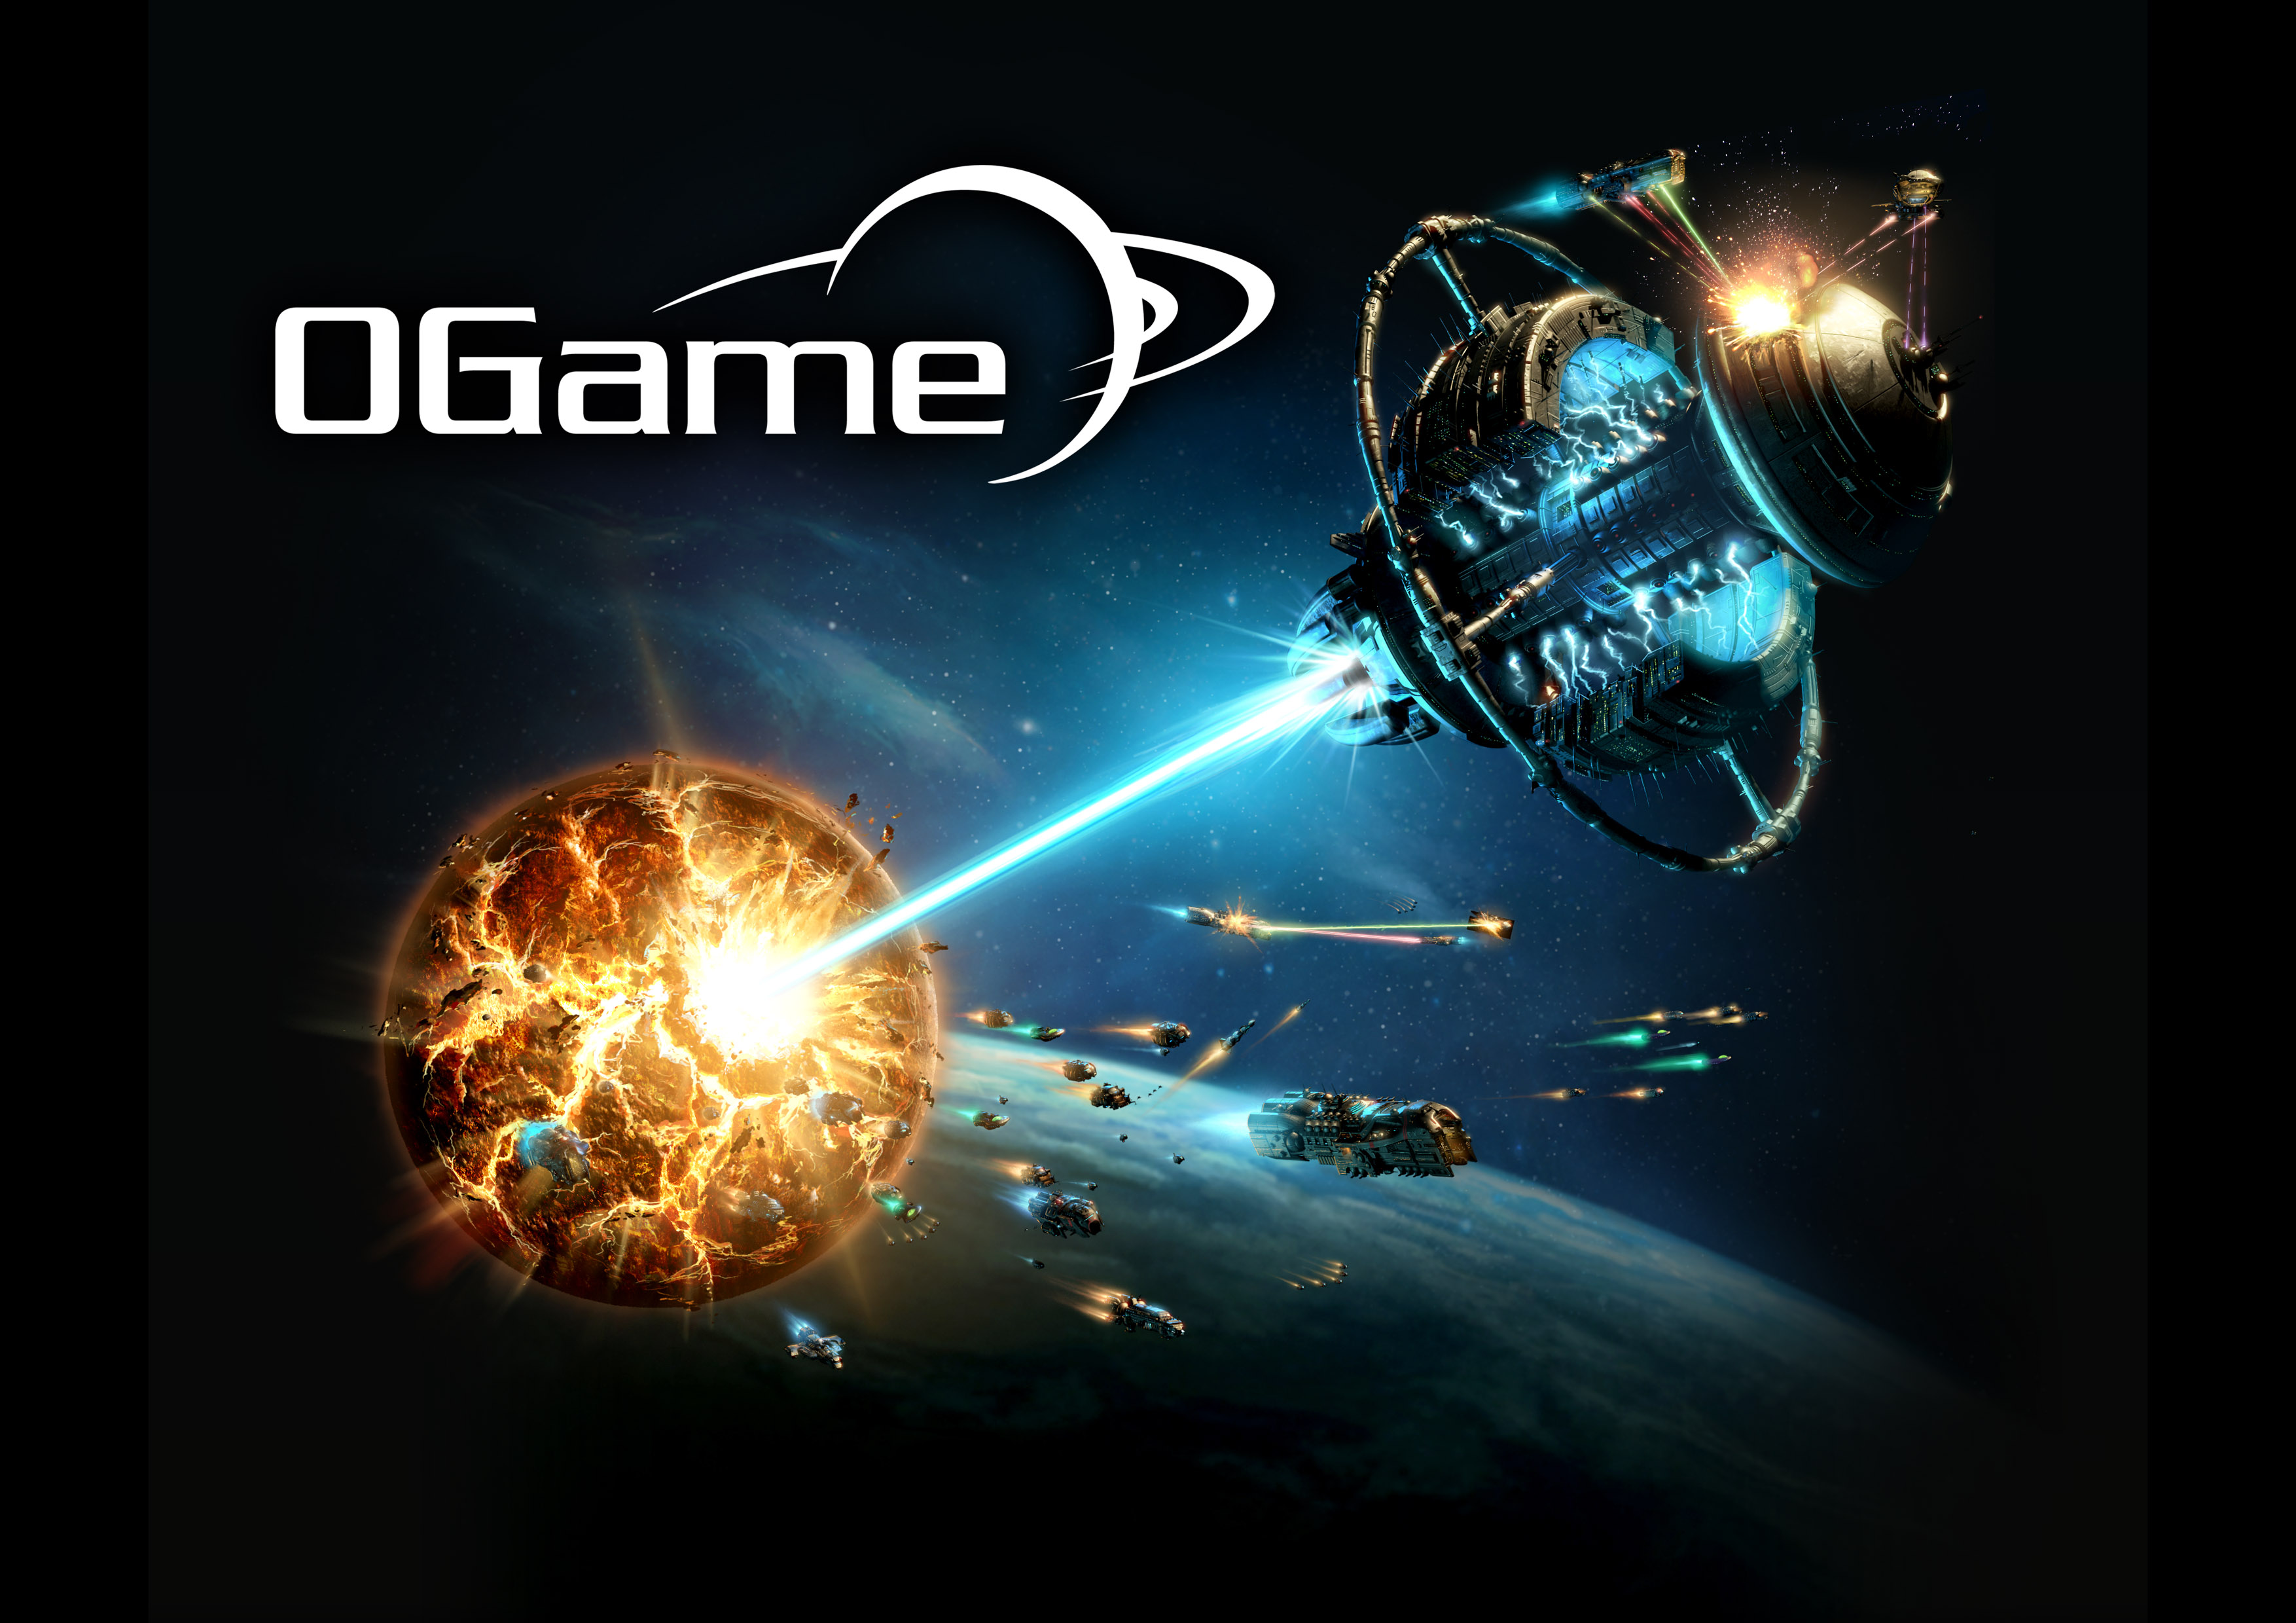 ogame galaxy tool